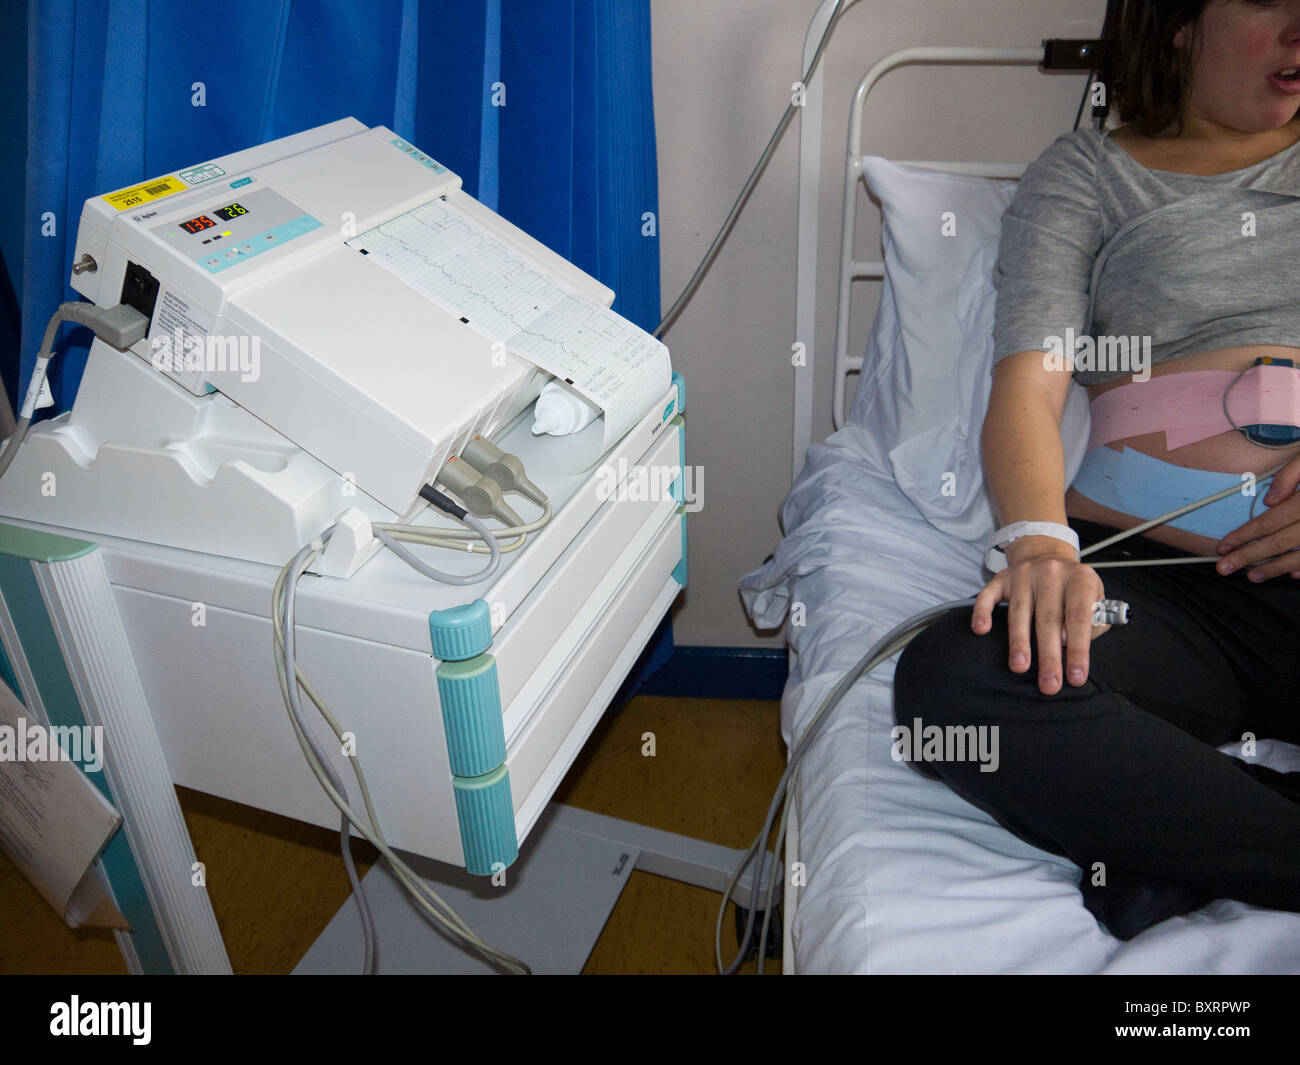 External fetal heart monitoring is performed by attaching external transducers to the mother's abdomen with elastic straps. Stock Photo